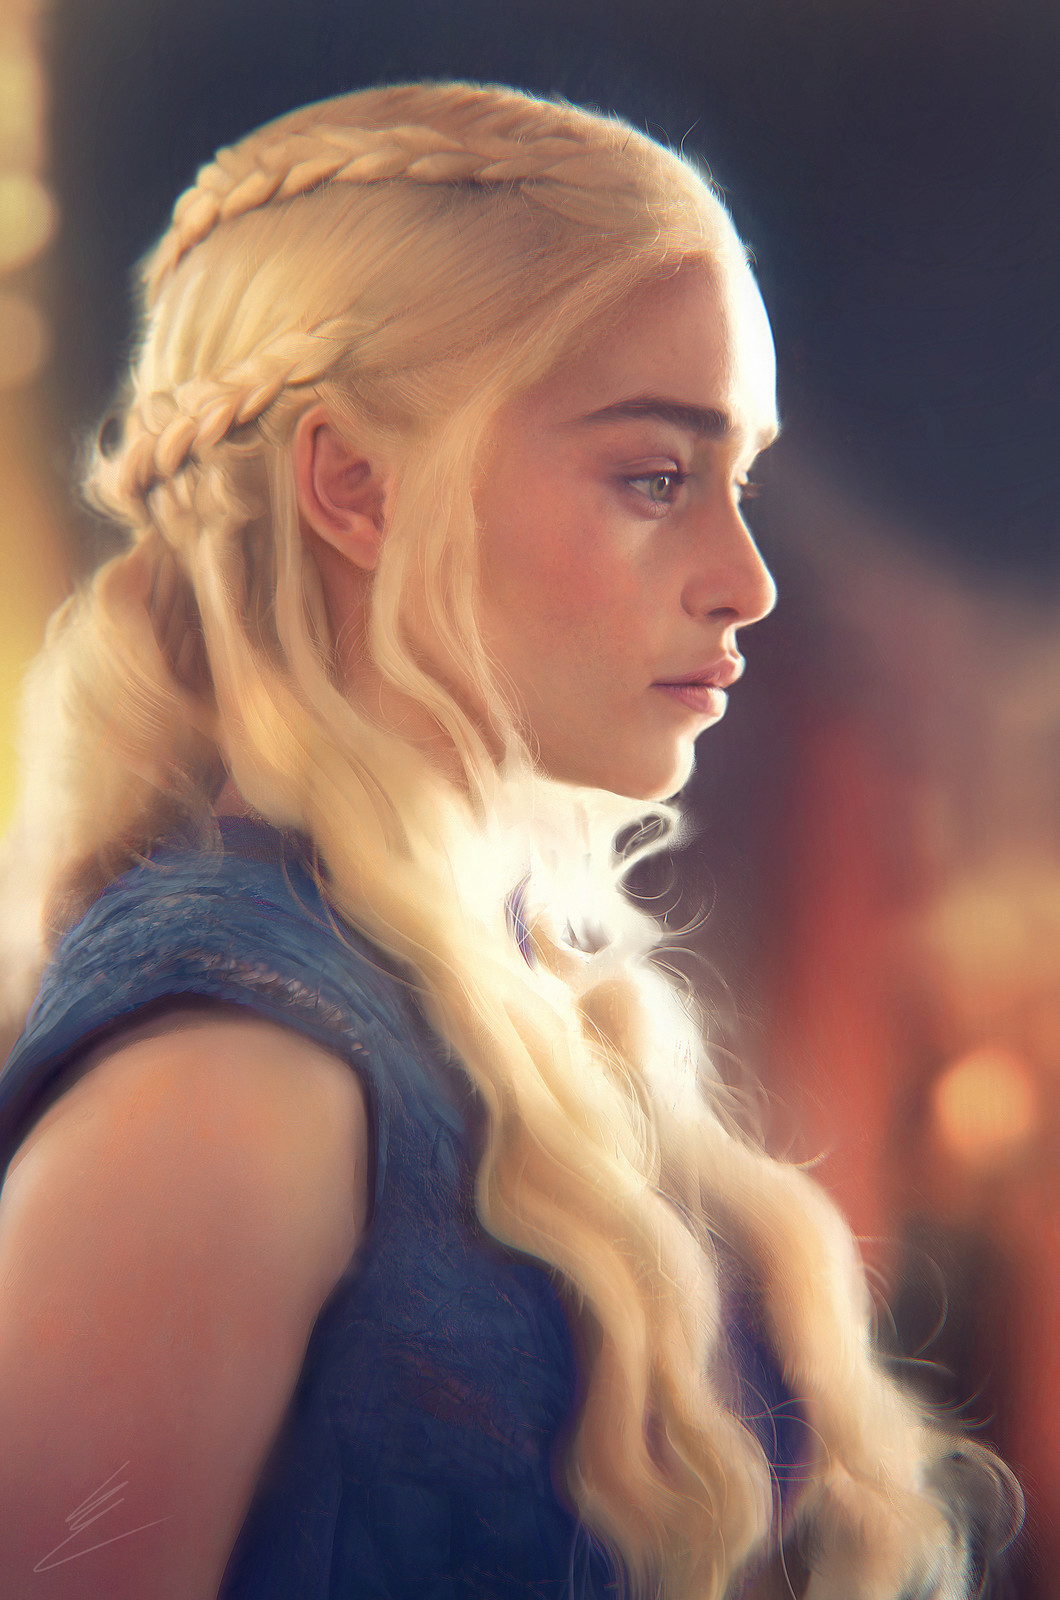 Get your “Game of Thrones” on with this Daenerys-inspired hairstyle